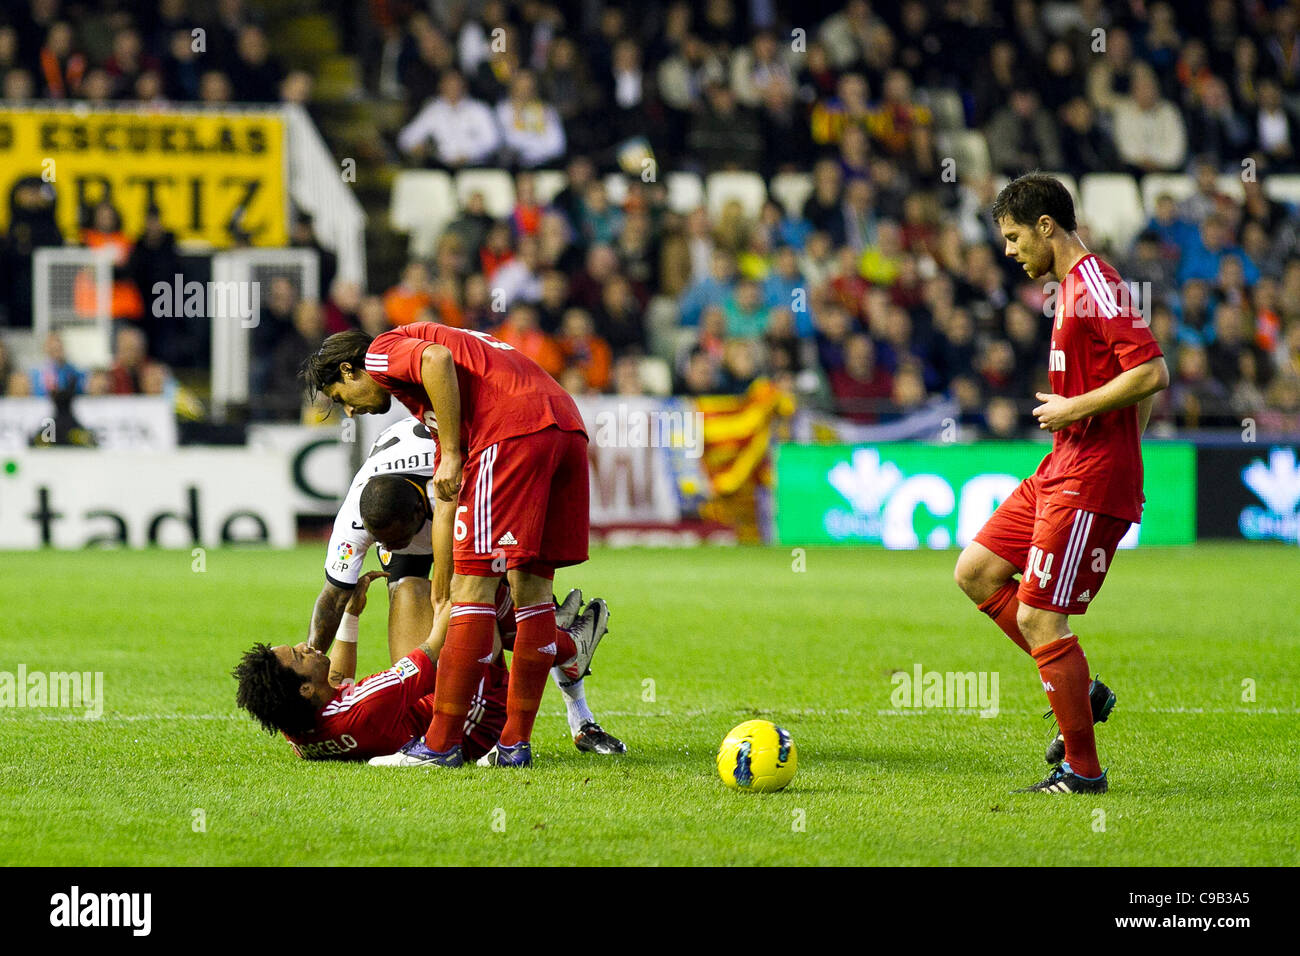 19/11/2011. Valencia, Spain  Football match between Valencia Club de Futbol and Real Madrid Club de Futbol, corresponding to 13th journey of Liga BBVA -------------------------------------  Marcelo, Real MAdrid defense, injured, surrounded by other players Stock Photo